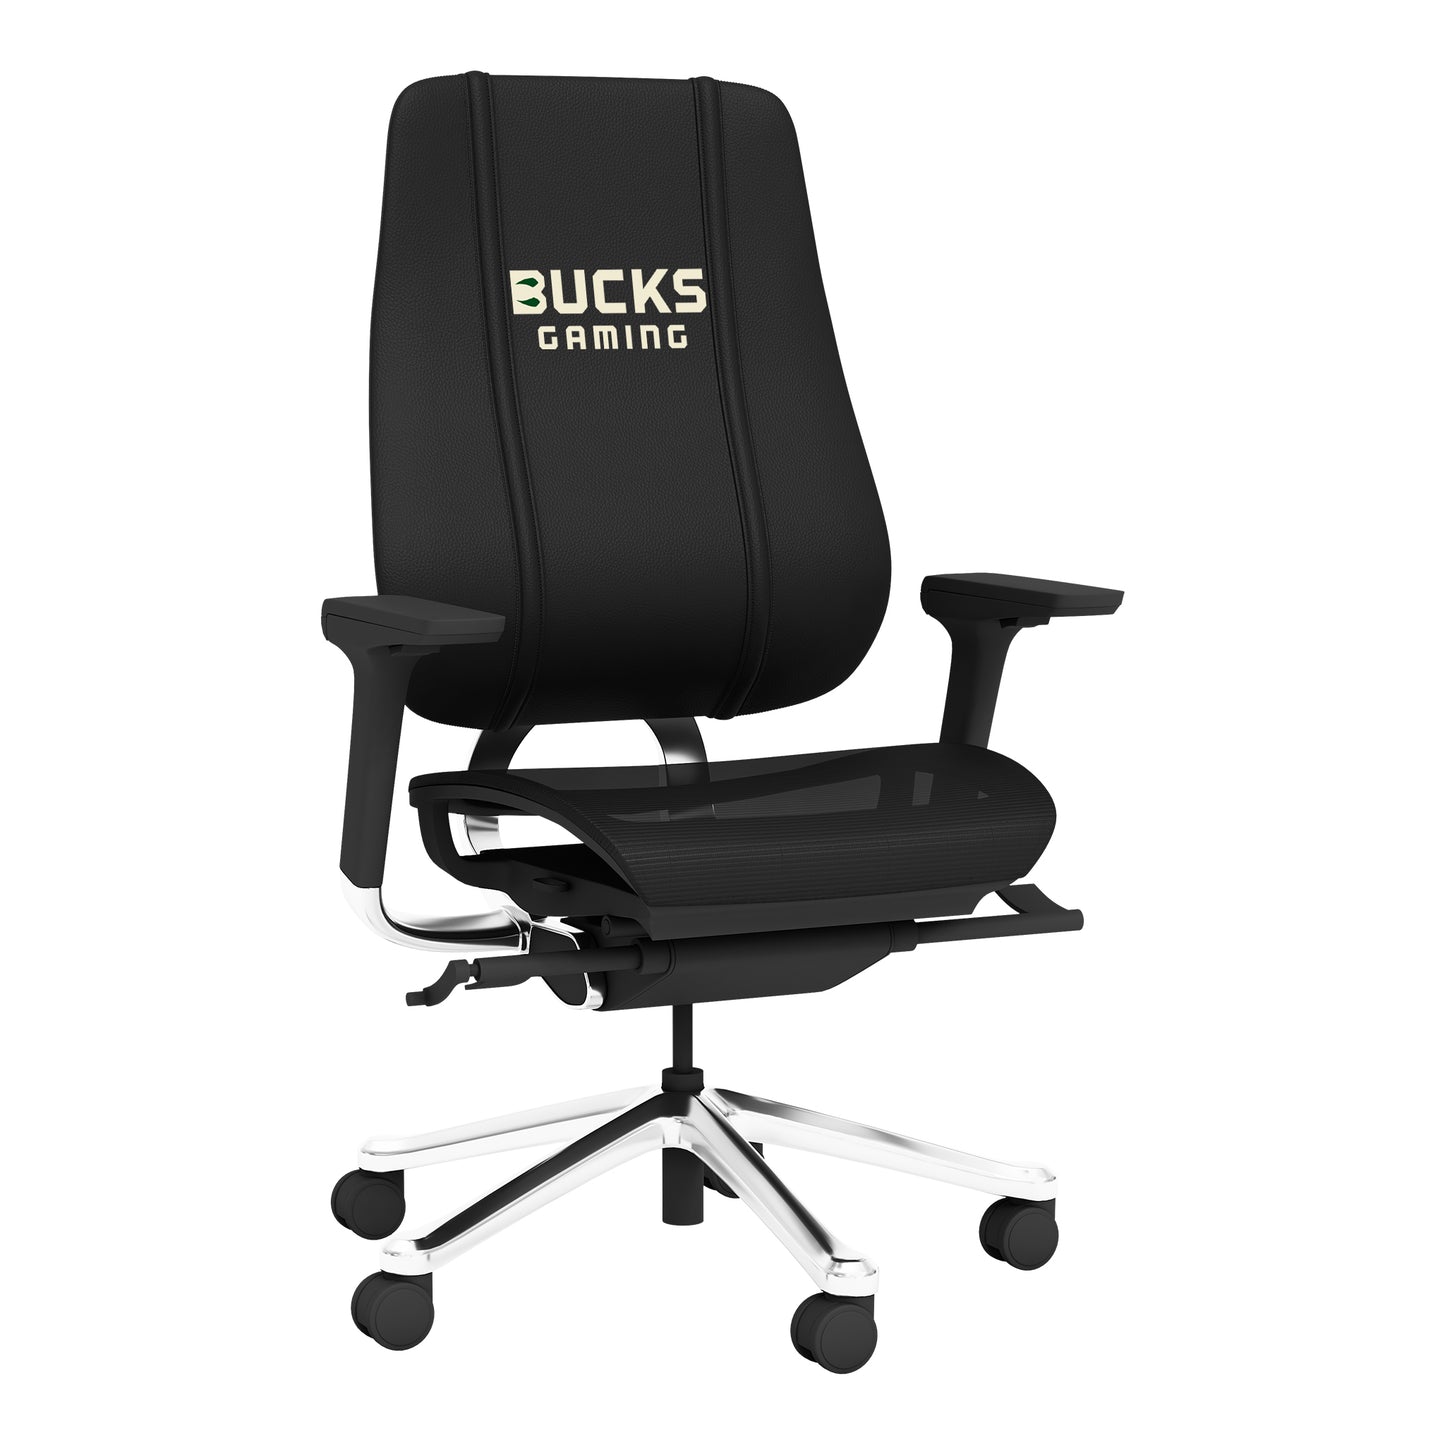 PhantomX Mesh Gaming Chair with Bucks Gaming Secondary Logo [Can Only Be Shipped to Wisconsin]